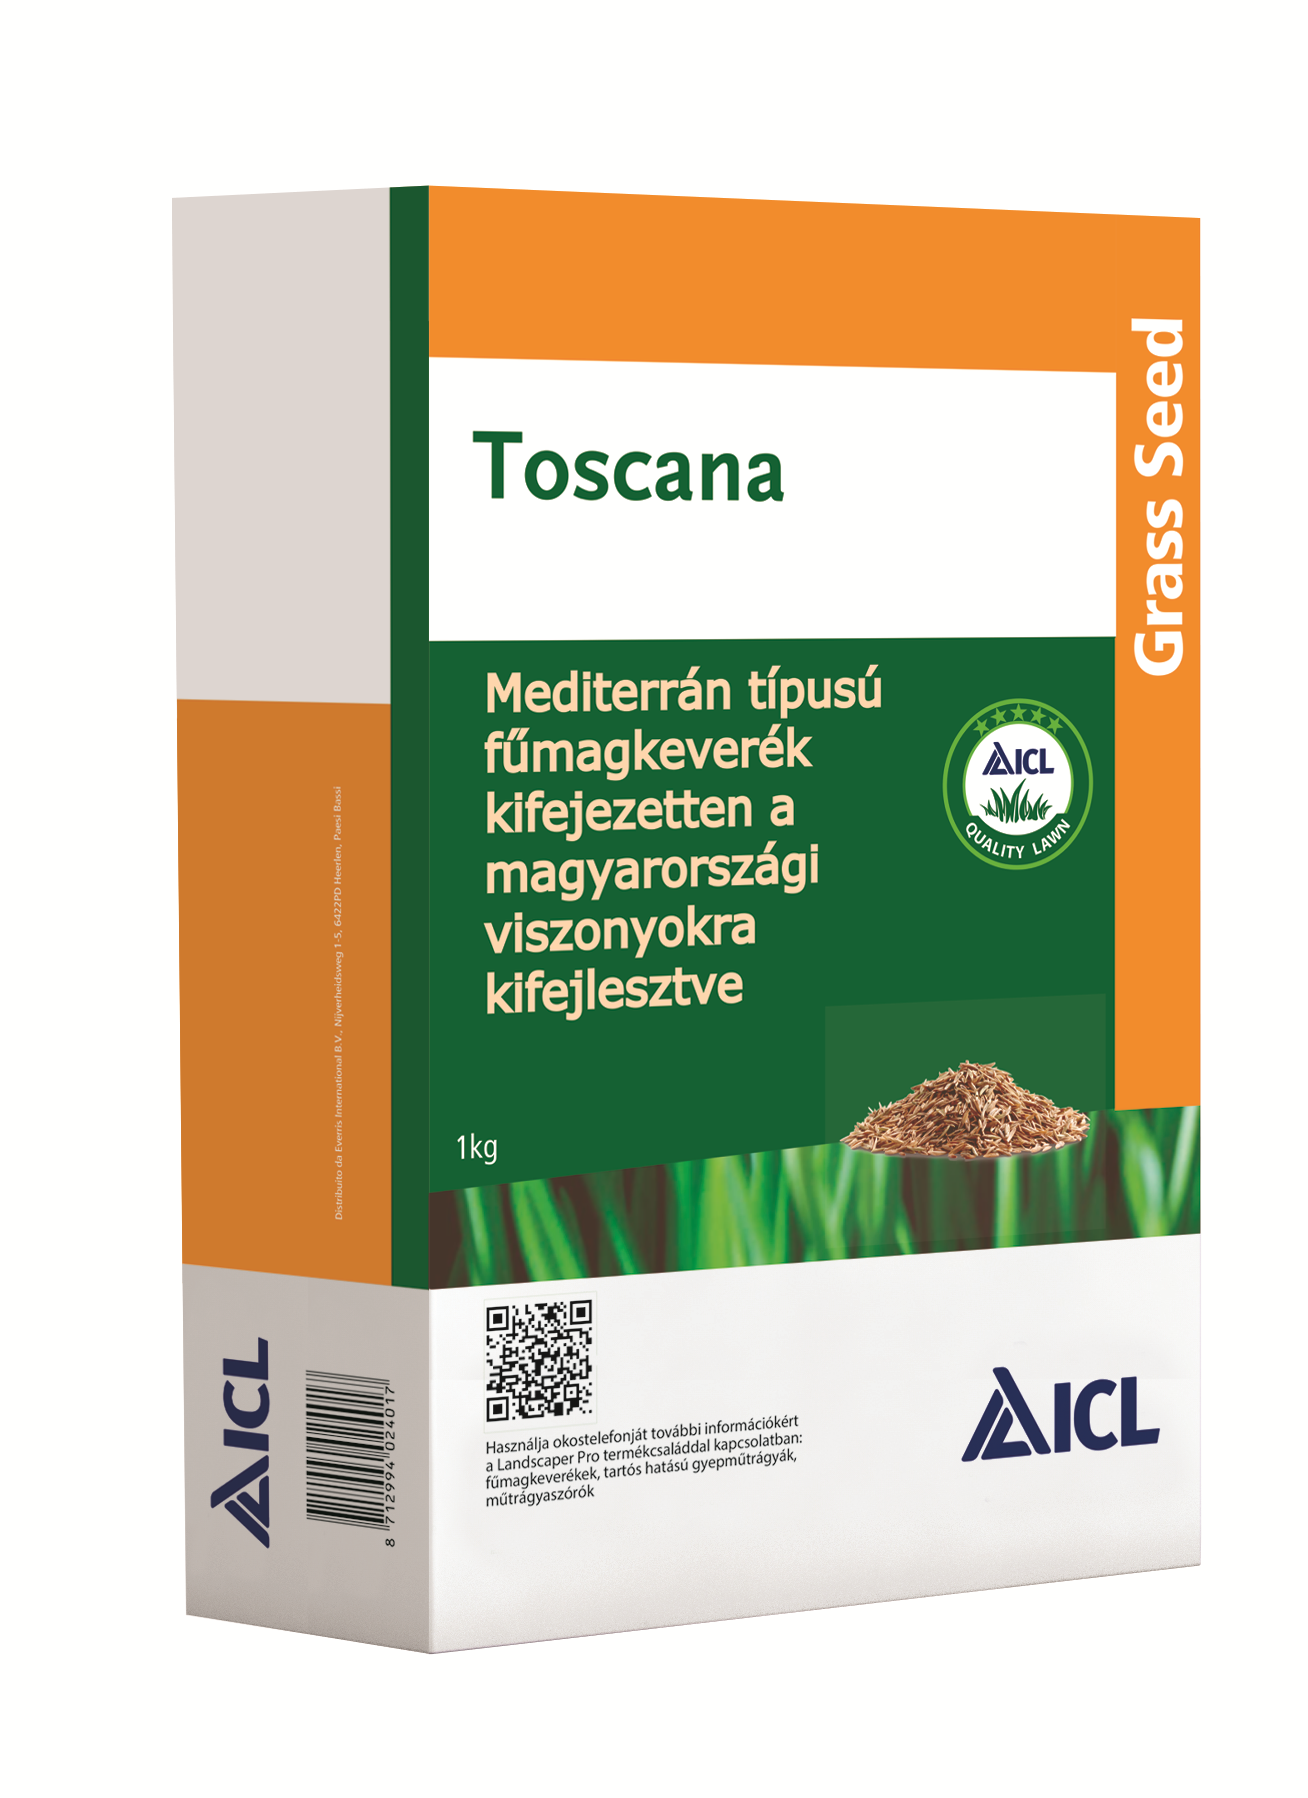 ICL grass seed Tuscany (Mediterranean type) 1 kg